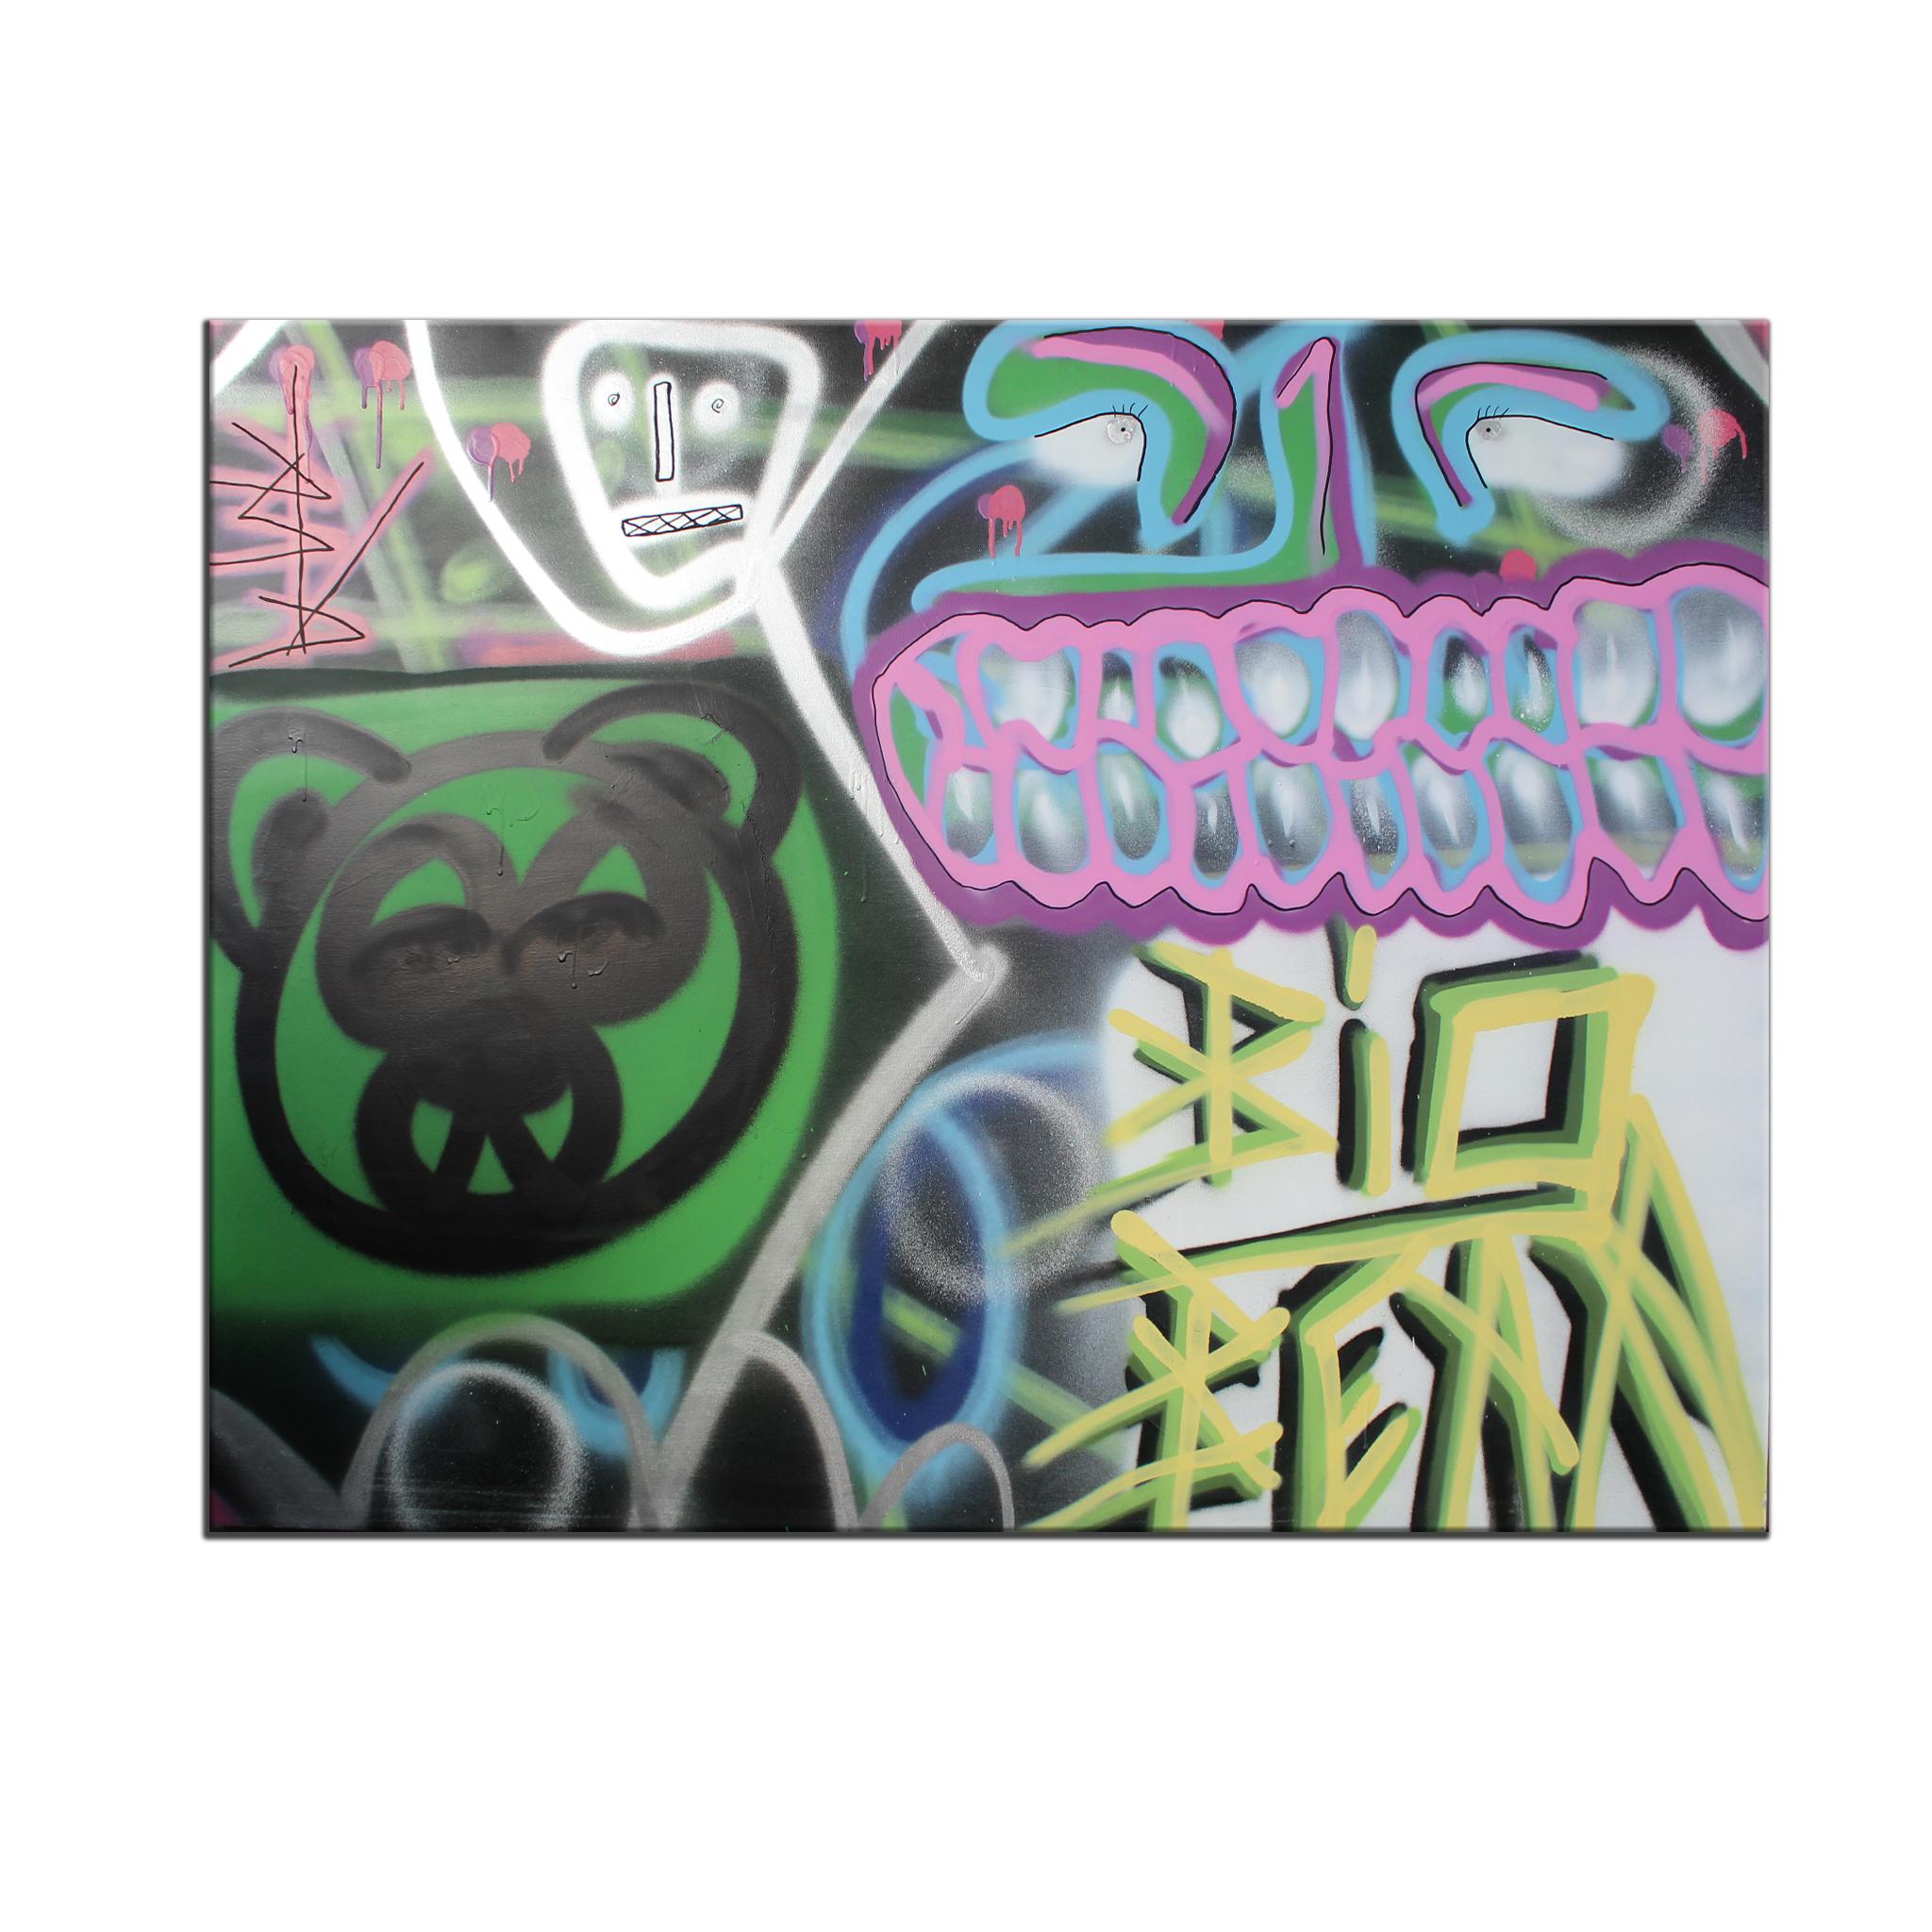 'Untitled XIII' Wrapped Canvas Original Painting features a bold, eccentric street art aesthetic saturated in vibrant tones of green, yellow, pink, purple, blue, silver, white, and black. Spray paint can in hand, Big Bear’s urban artistry is